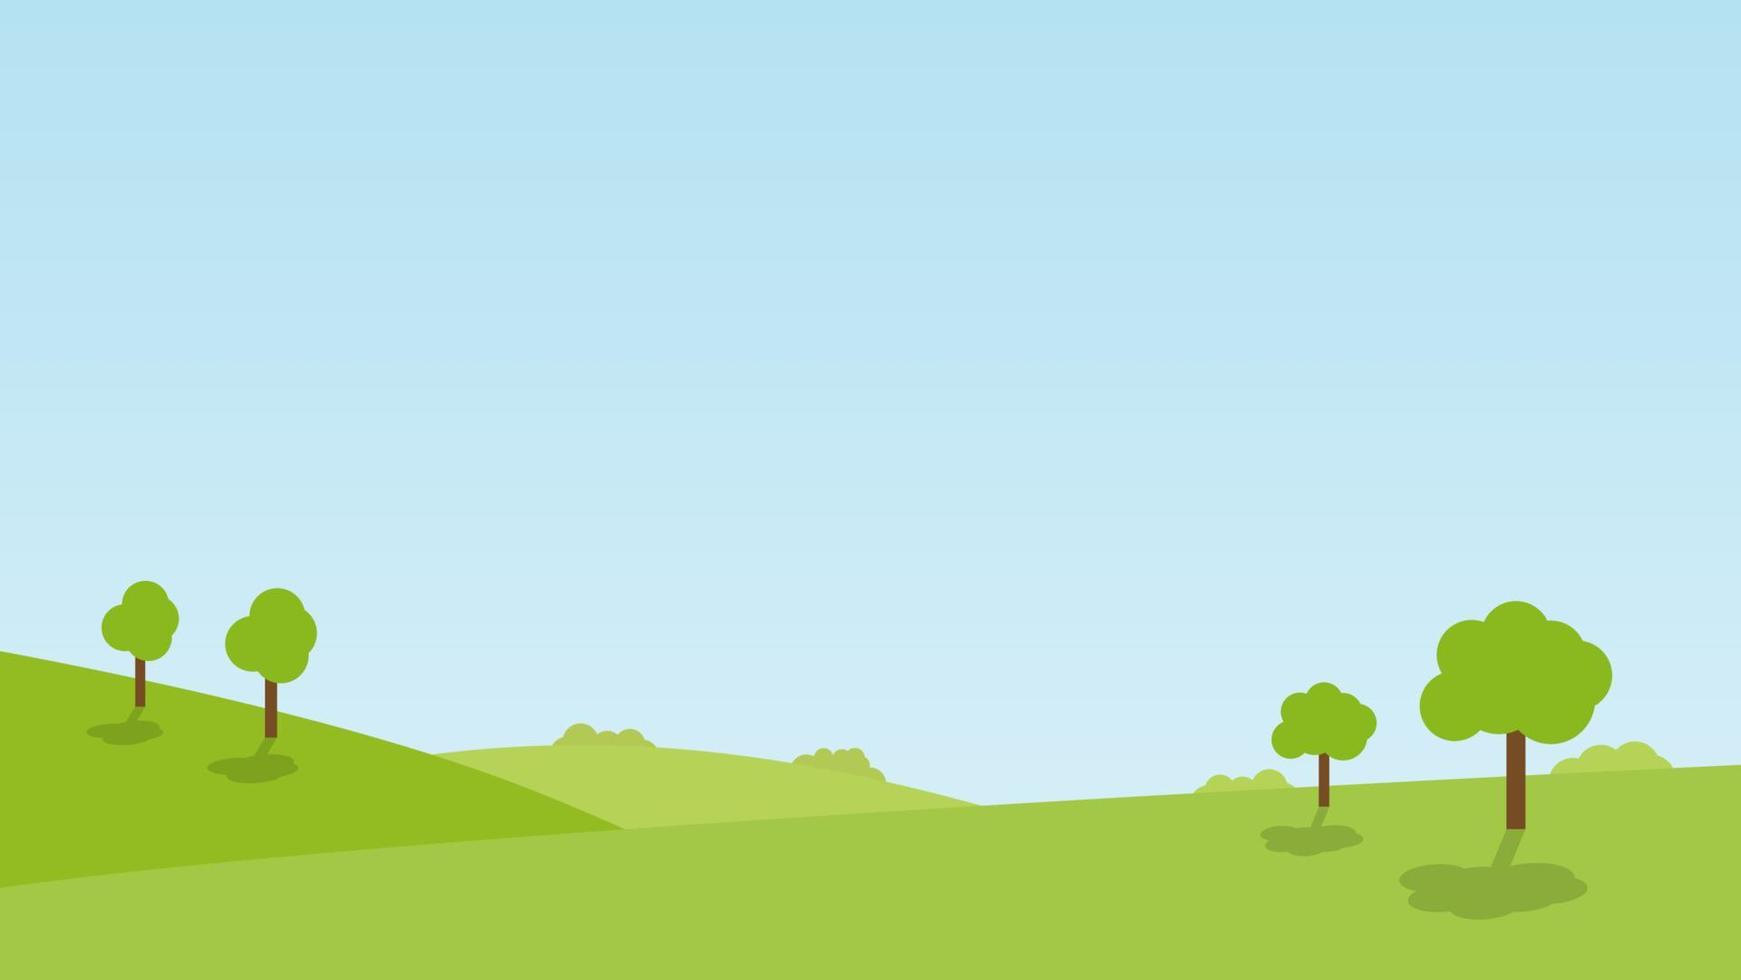 landscape cartoon scene with green trees on hills and summer blue sky background vector